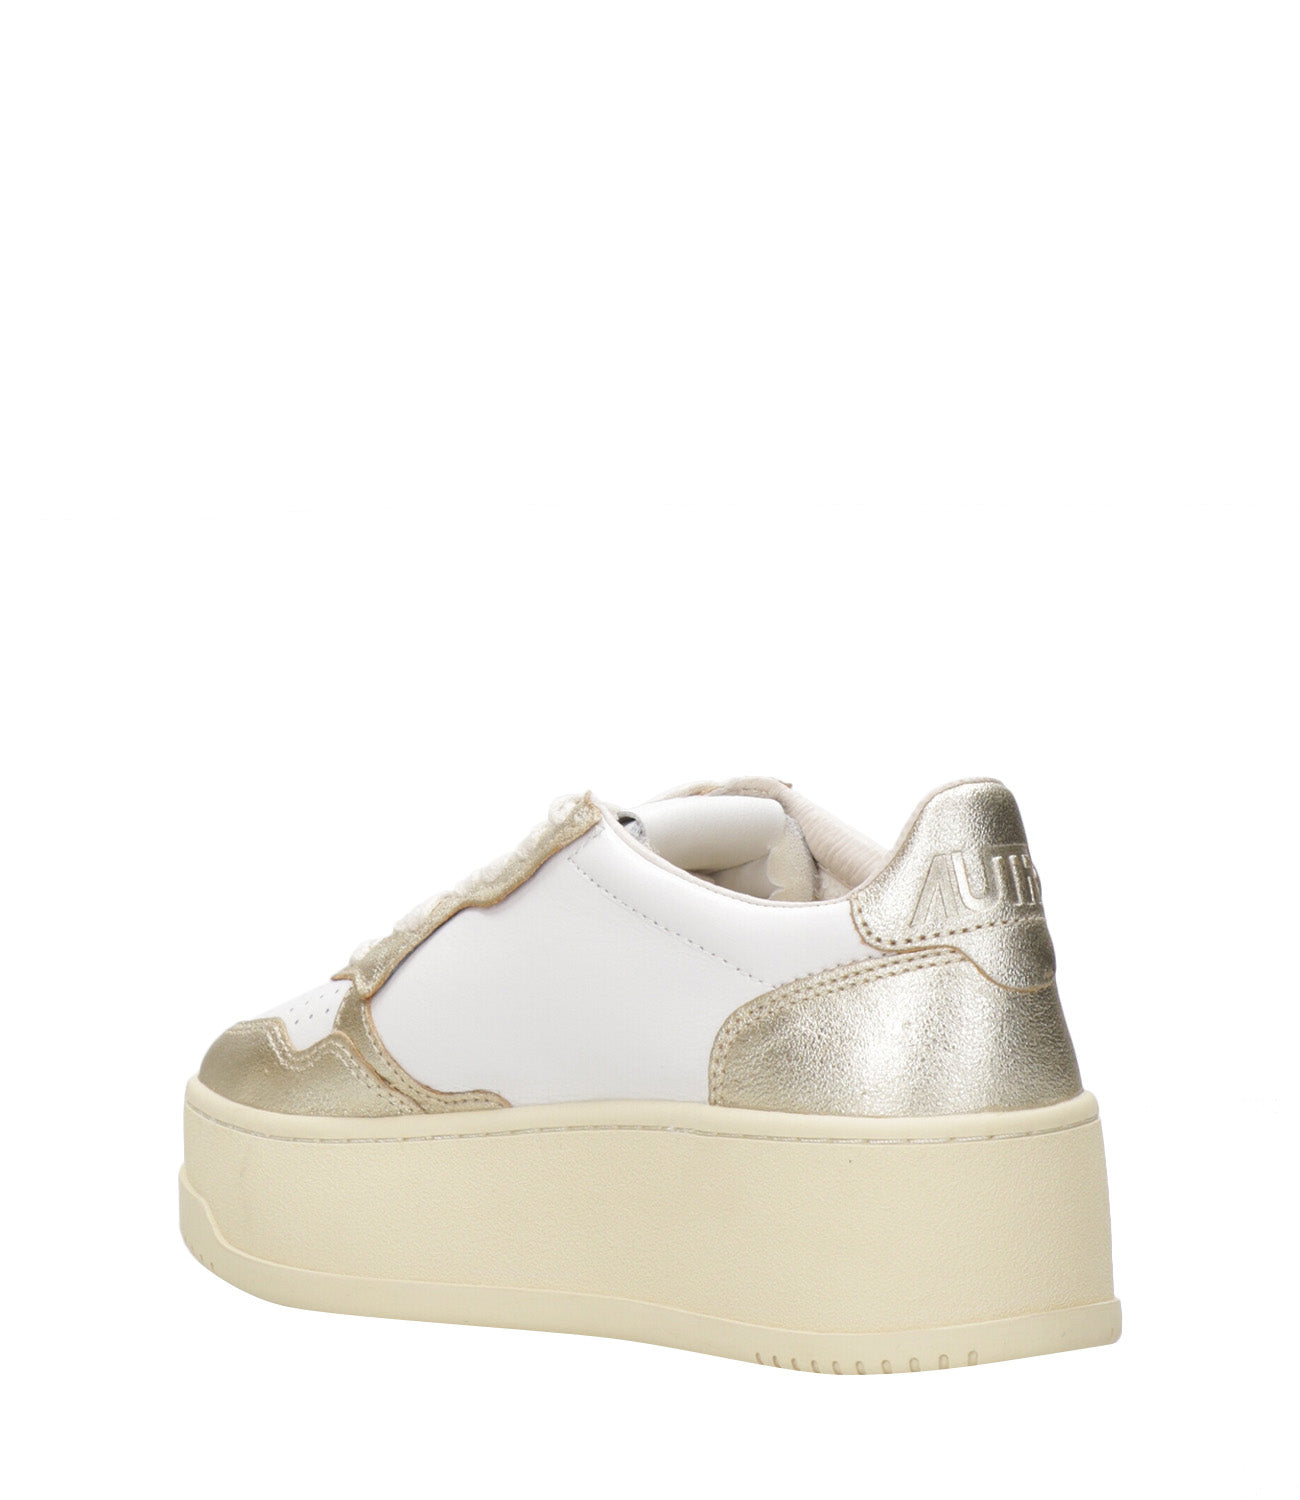 Autry | Platform Low White and Platinum Sneakers